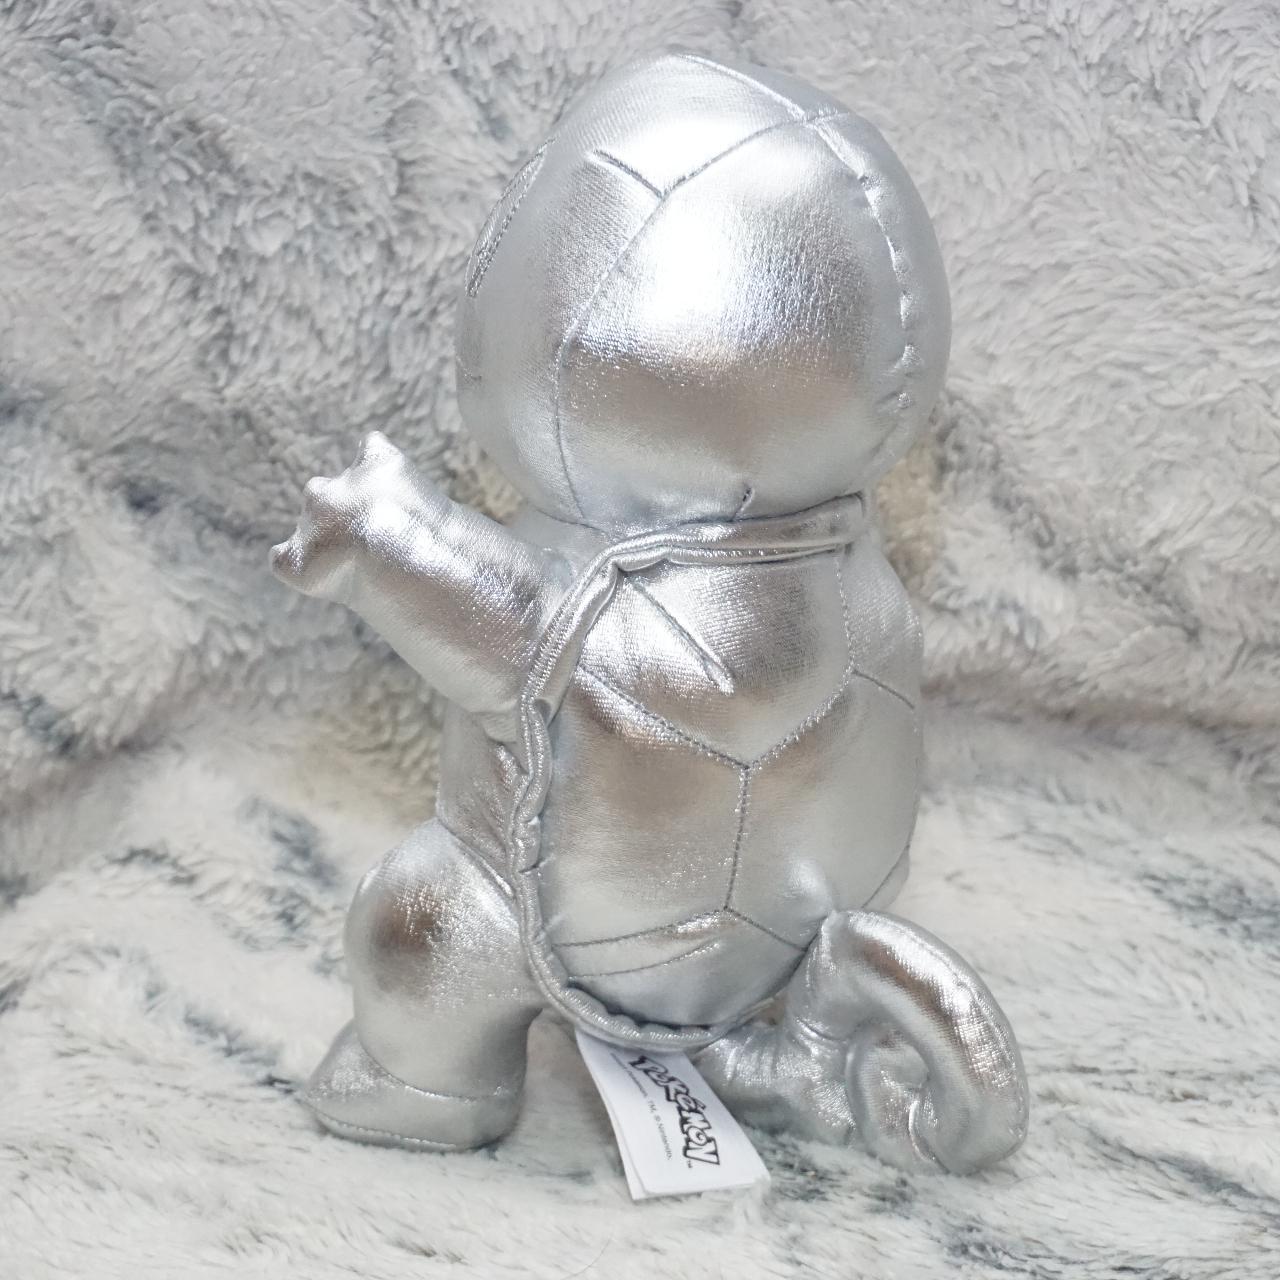 Product Image 3 - 25th Anniversary Silver Squirtle Plush
8"